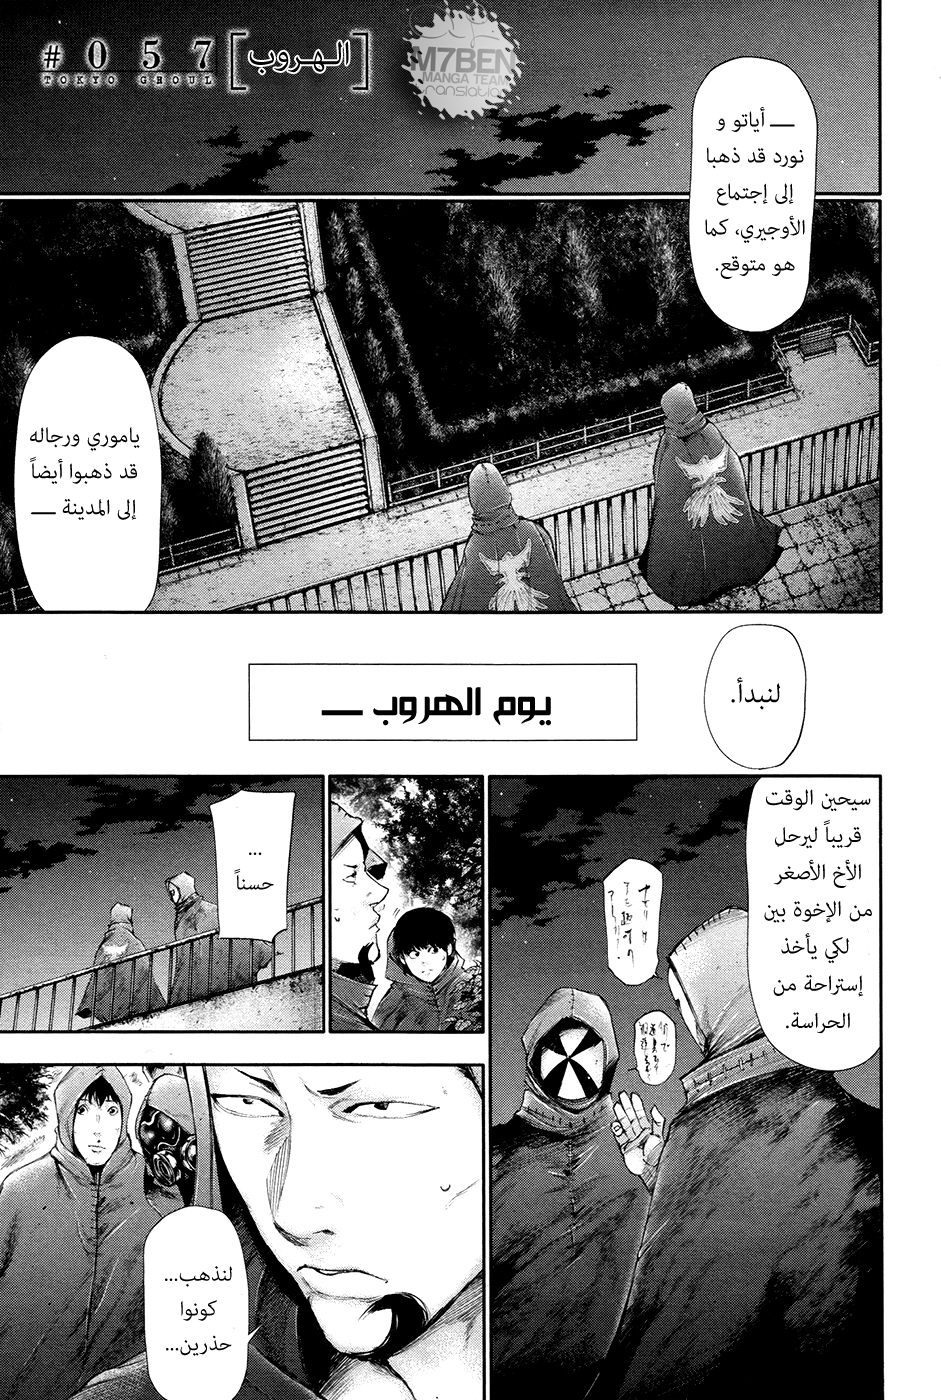 Tokyo Ghoul: Chapter 57 - Page 1